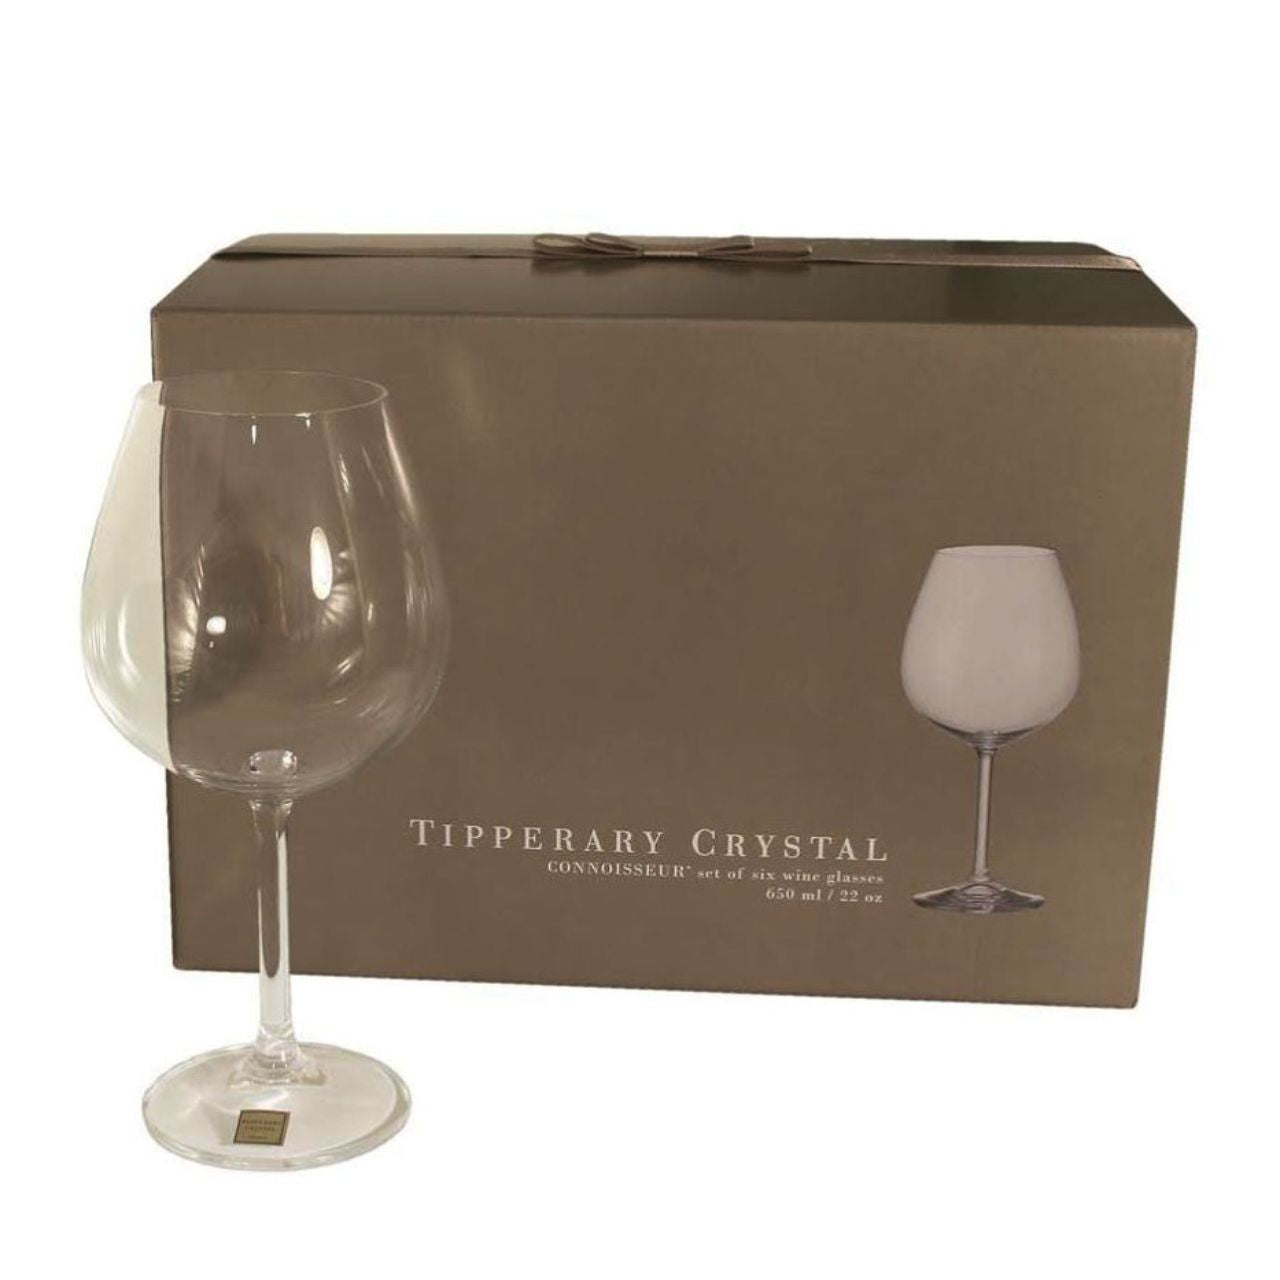 Tipperary Crystal Connoisseur Set of 6 Wine Glasses 650ml  An exquisite set of 6 x 650ml wine glasses from Tipperary Crystal and now at a stunning price.  Presented is a signature grey Tipperary Crystal box.